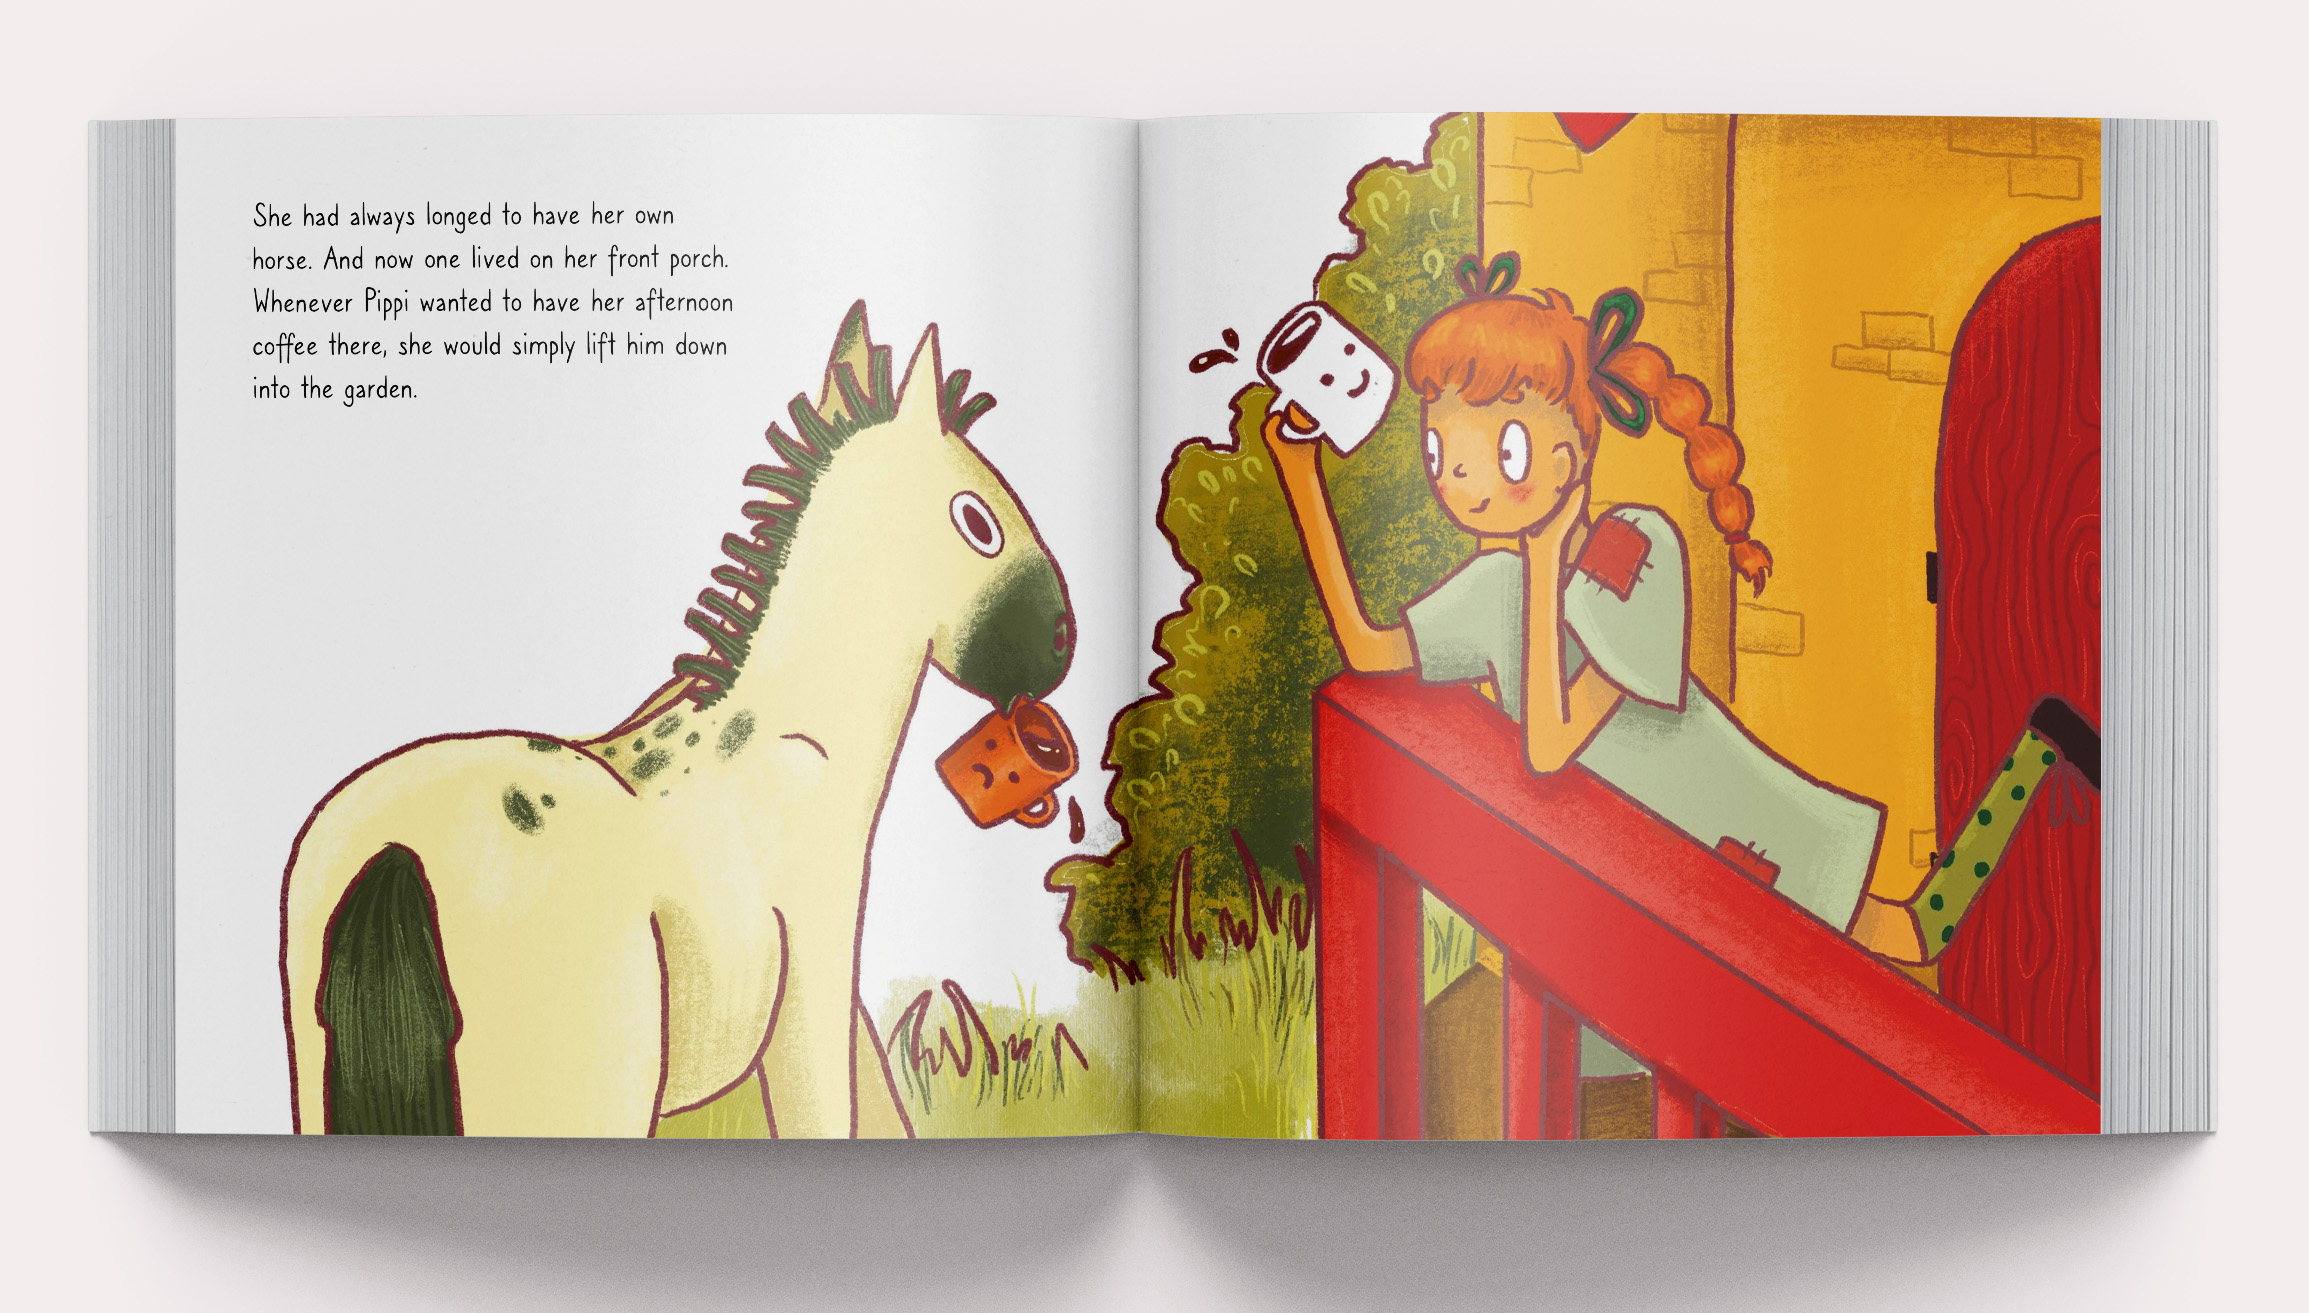 Children's book illustration by Maddison Dunn showing character of Pippi Longstocking and the horse.